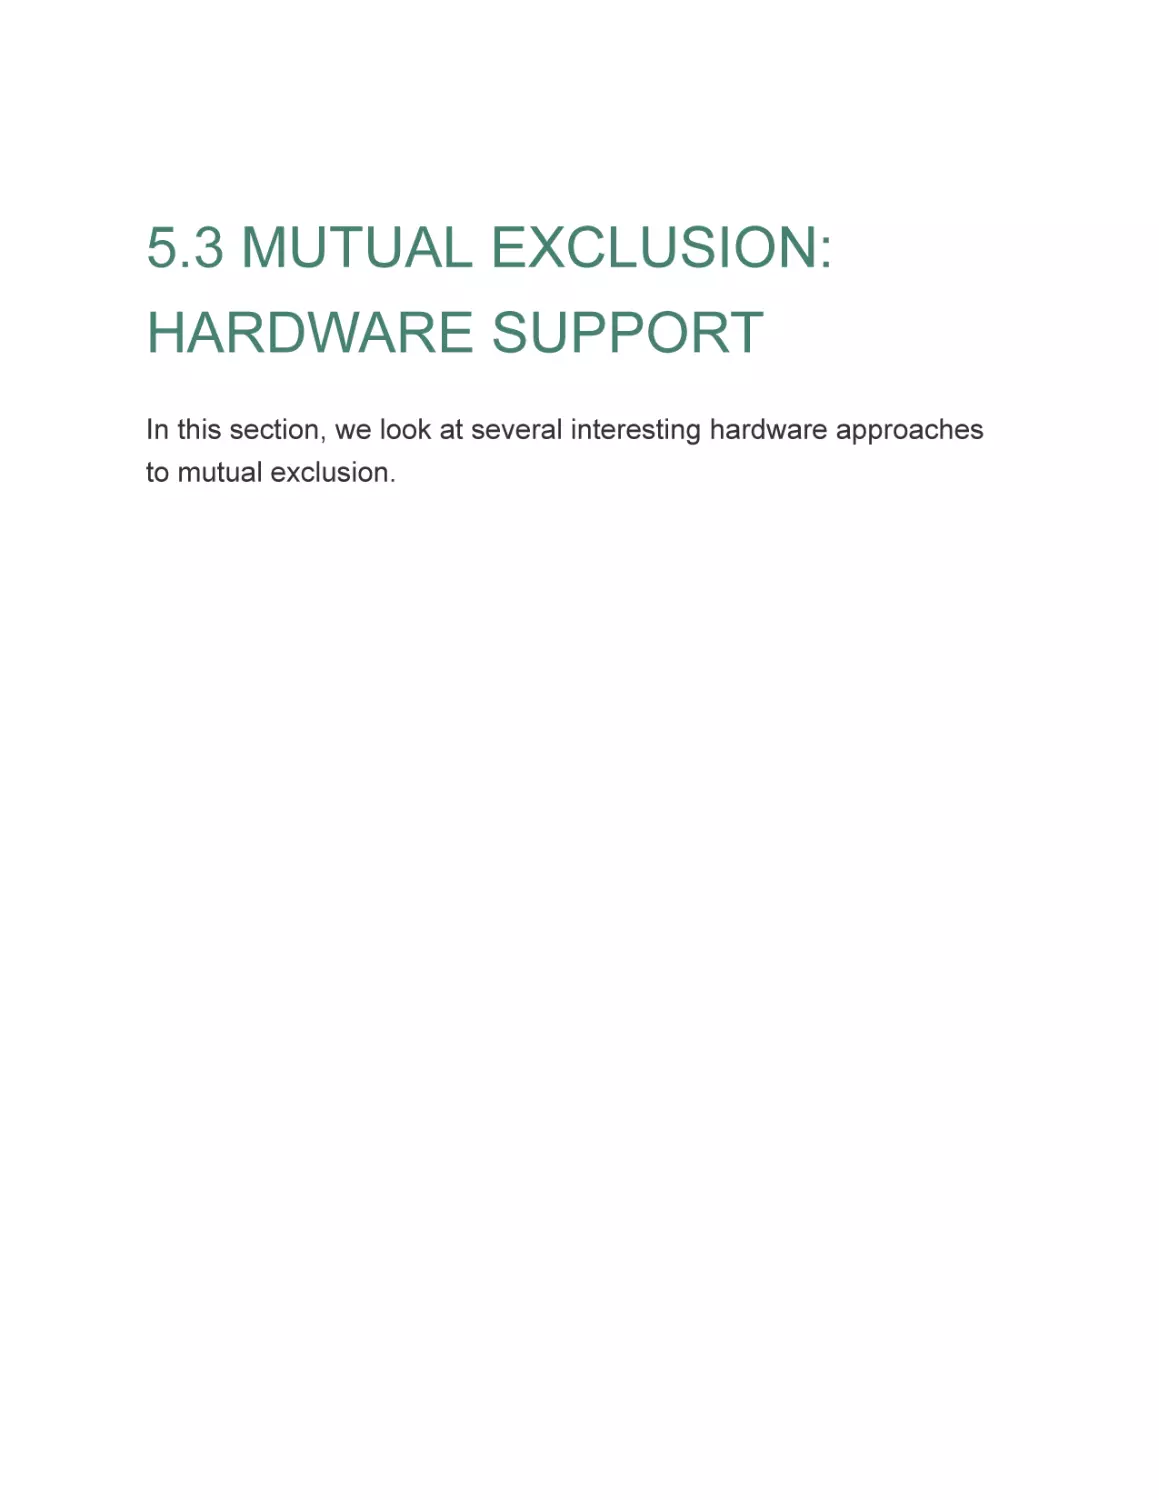 5.3 MUTUAL EXCLUSION